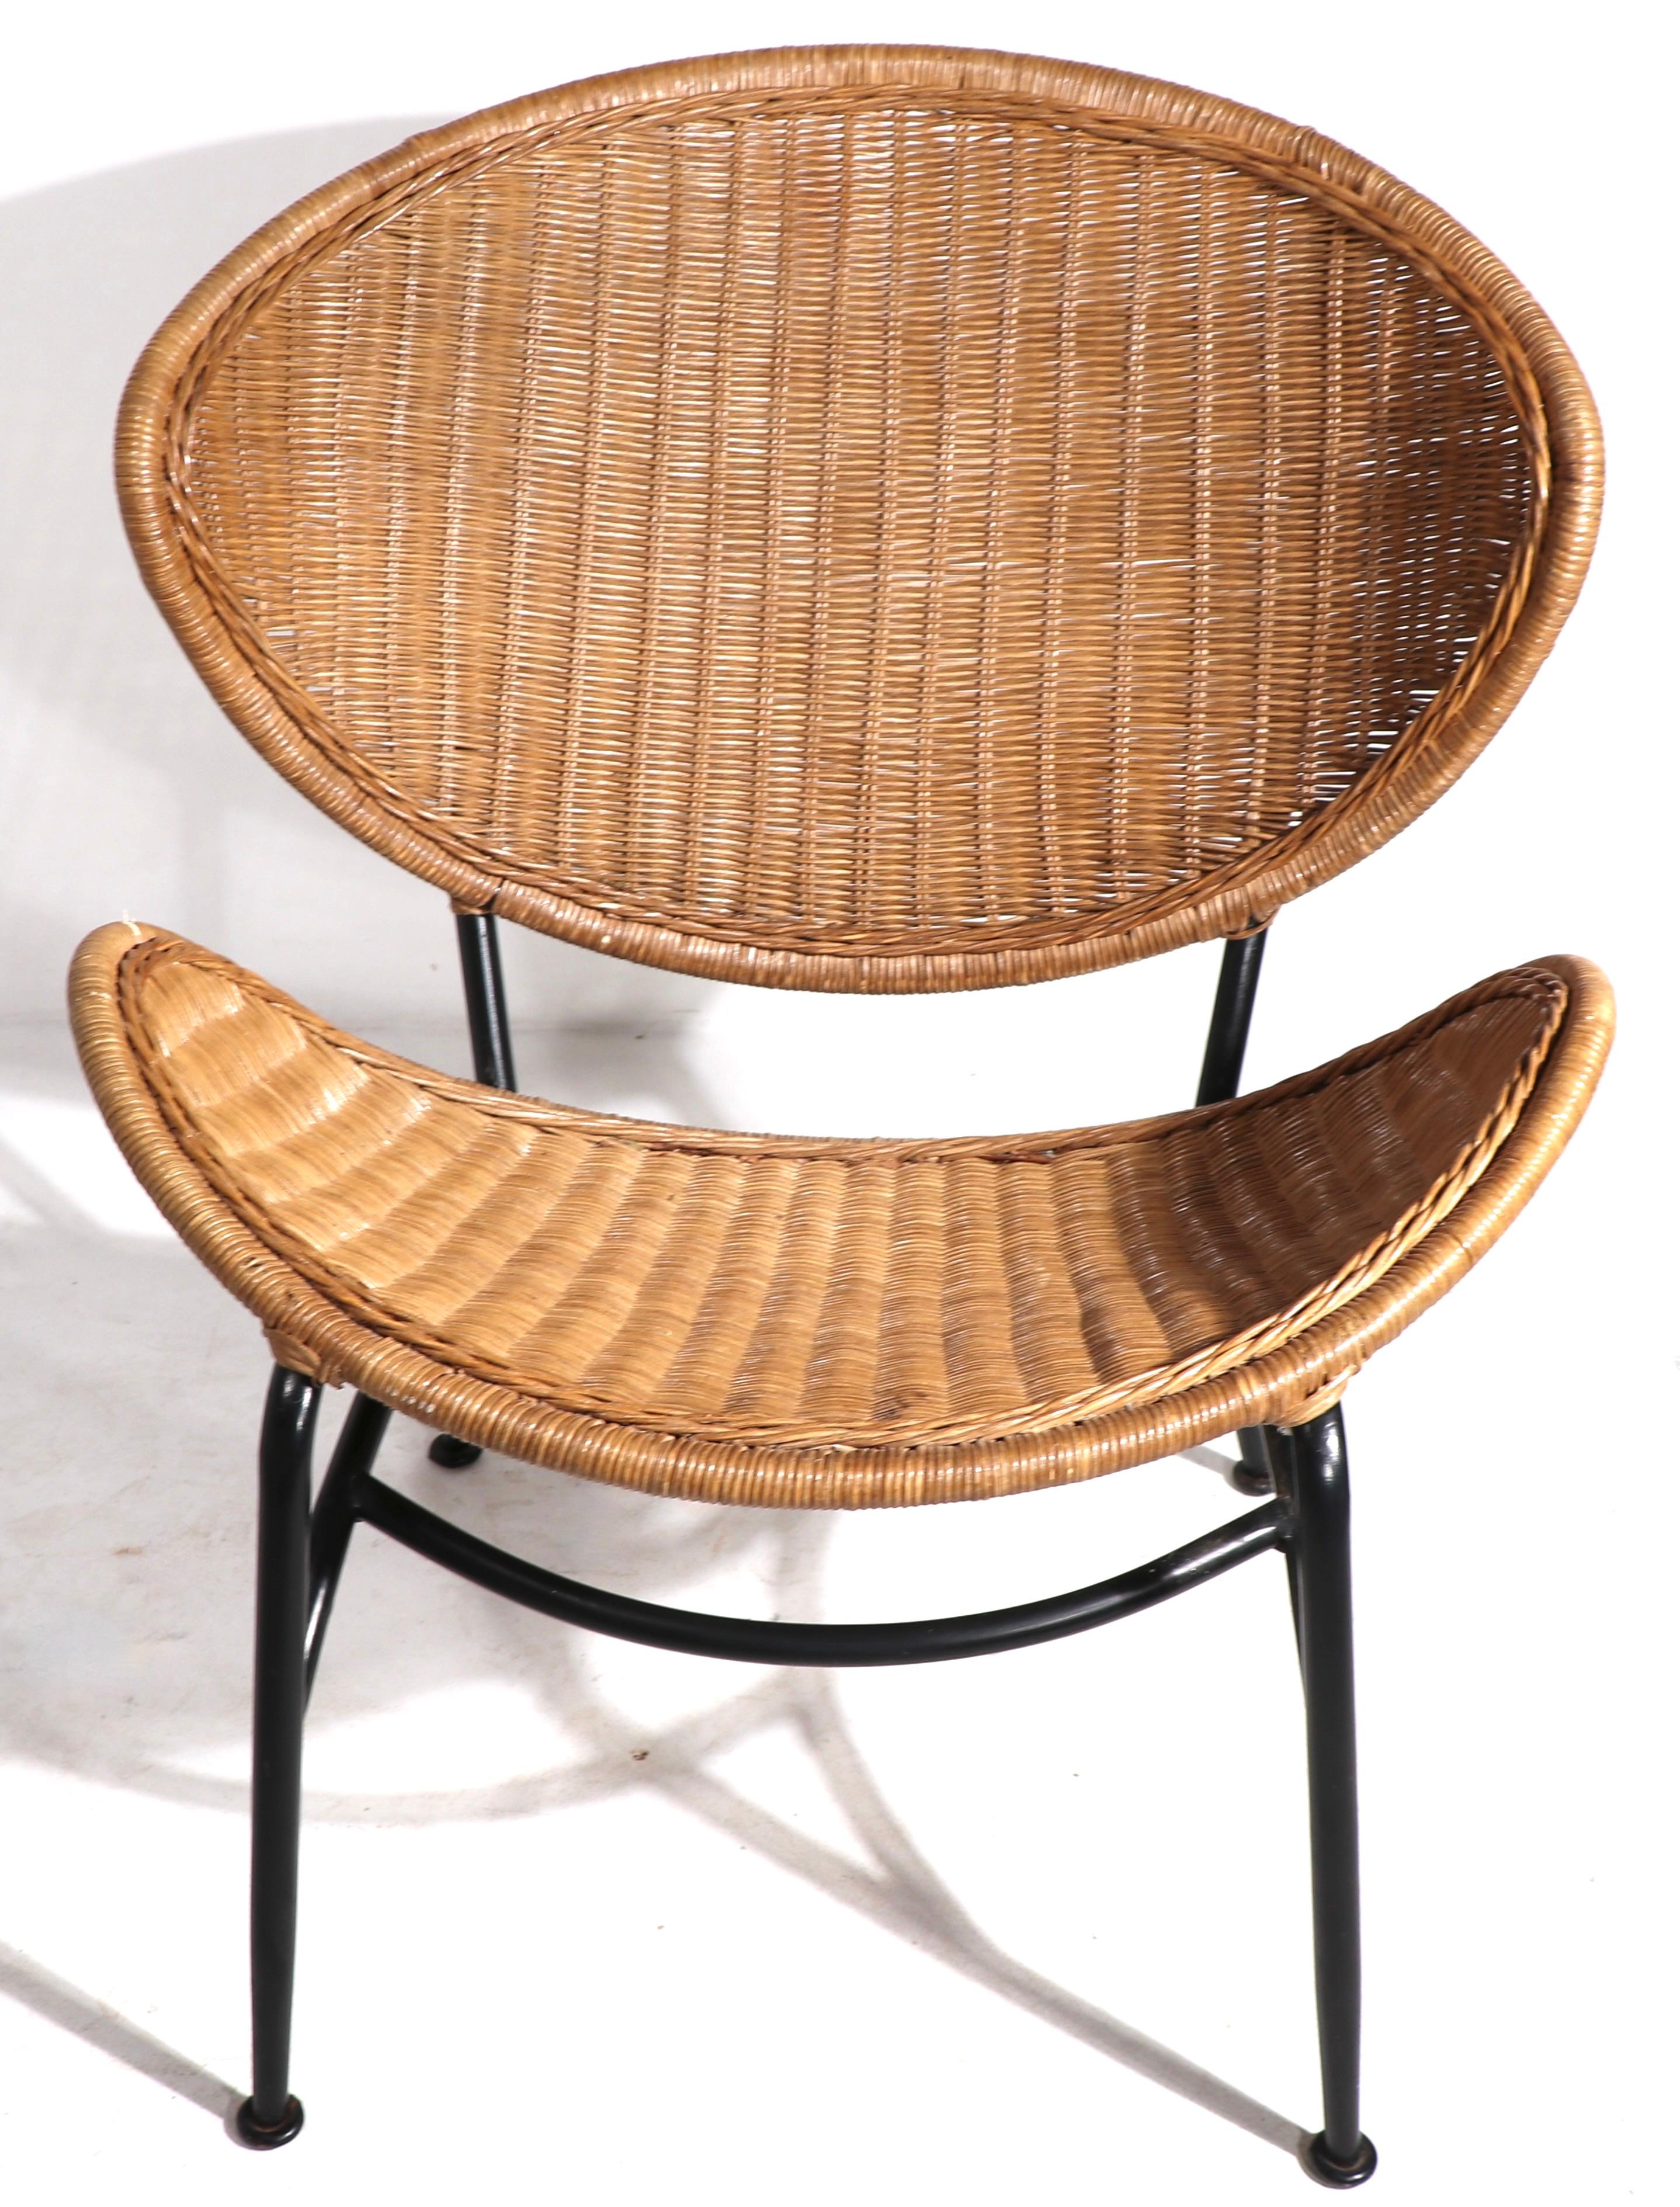 Chic and stylish mid century wicker and metal lounge chair, in very good original condition. The chair features an exaggerated oval back rest, tubular metal frame in original black paint finish- and wide wicker seat. Vintage 1950’s chair, clean,